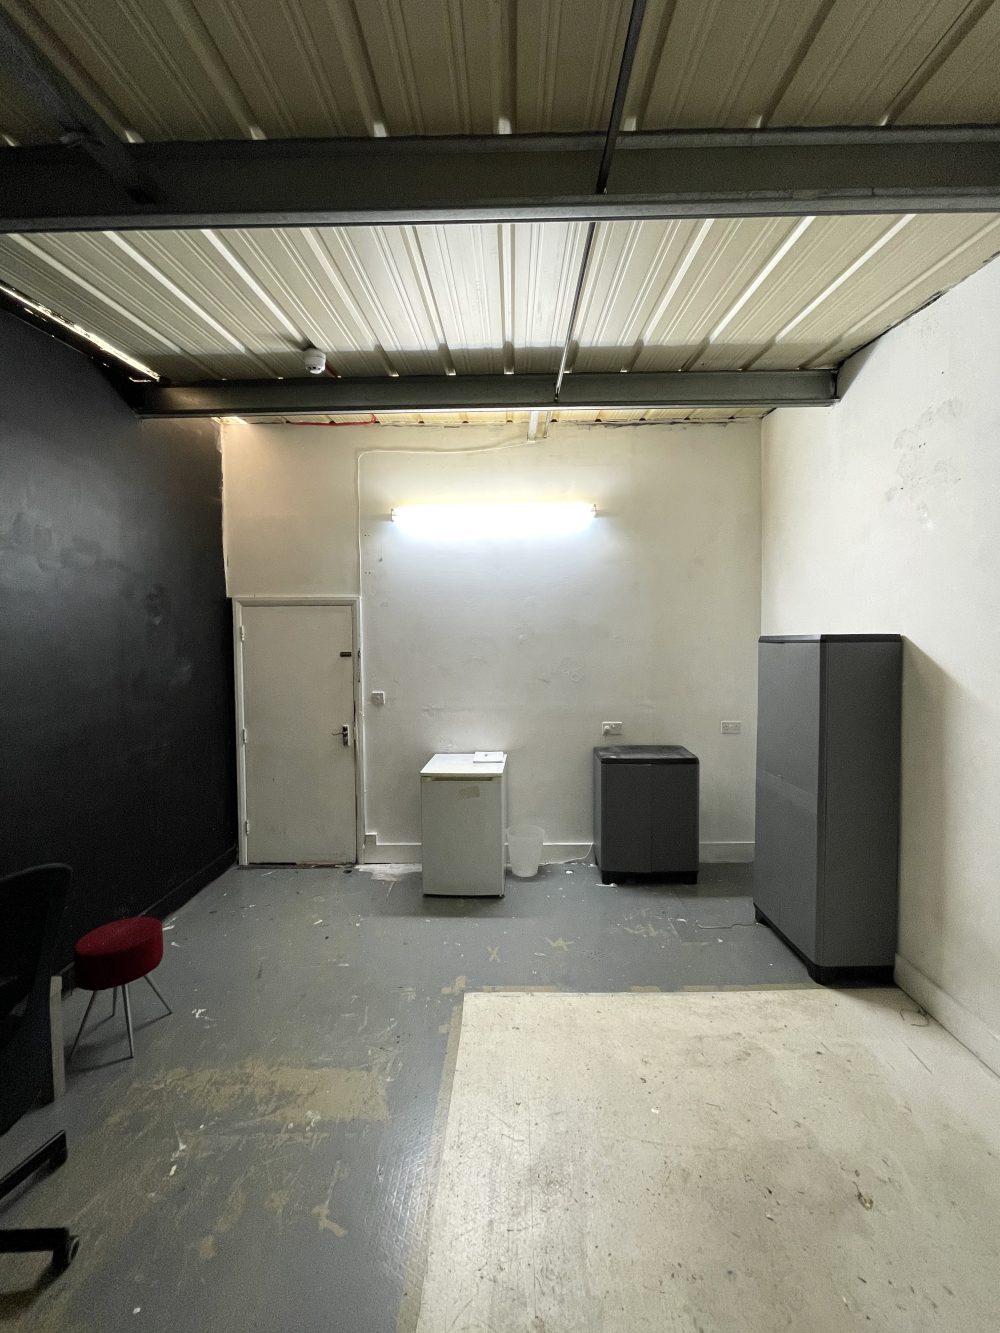 Light indurstrial unit to rent in N16 Stoke Newington Shelford Place PIc10